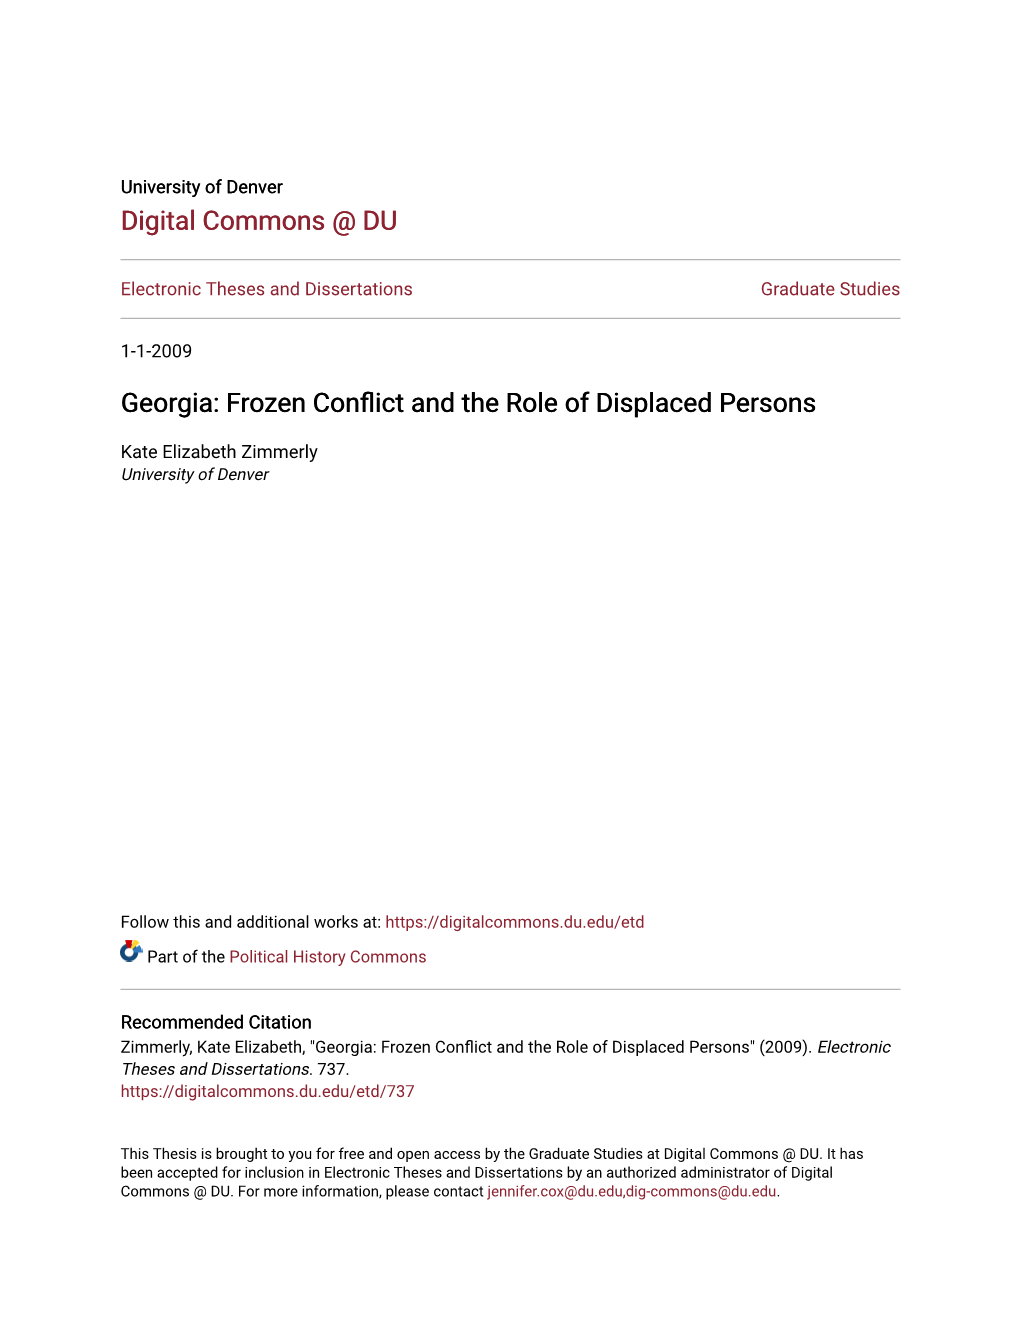 Georgia: Frozen Conflict and the Role of Displaced Persons